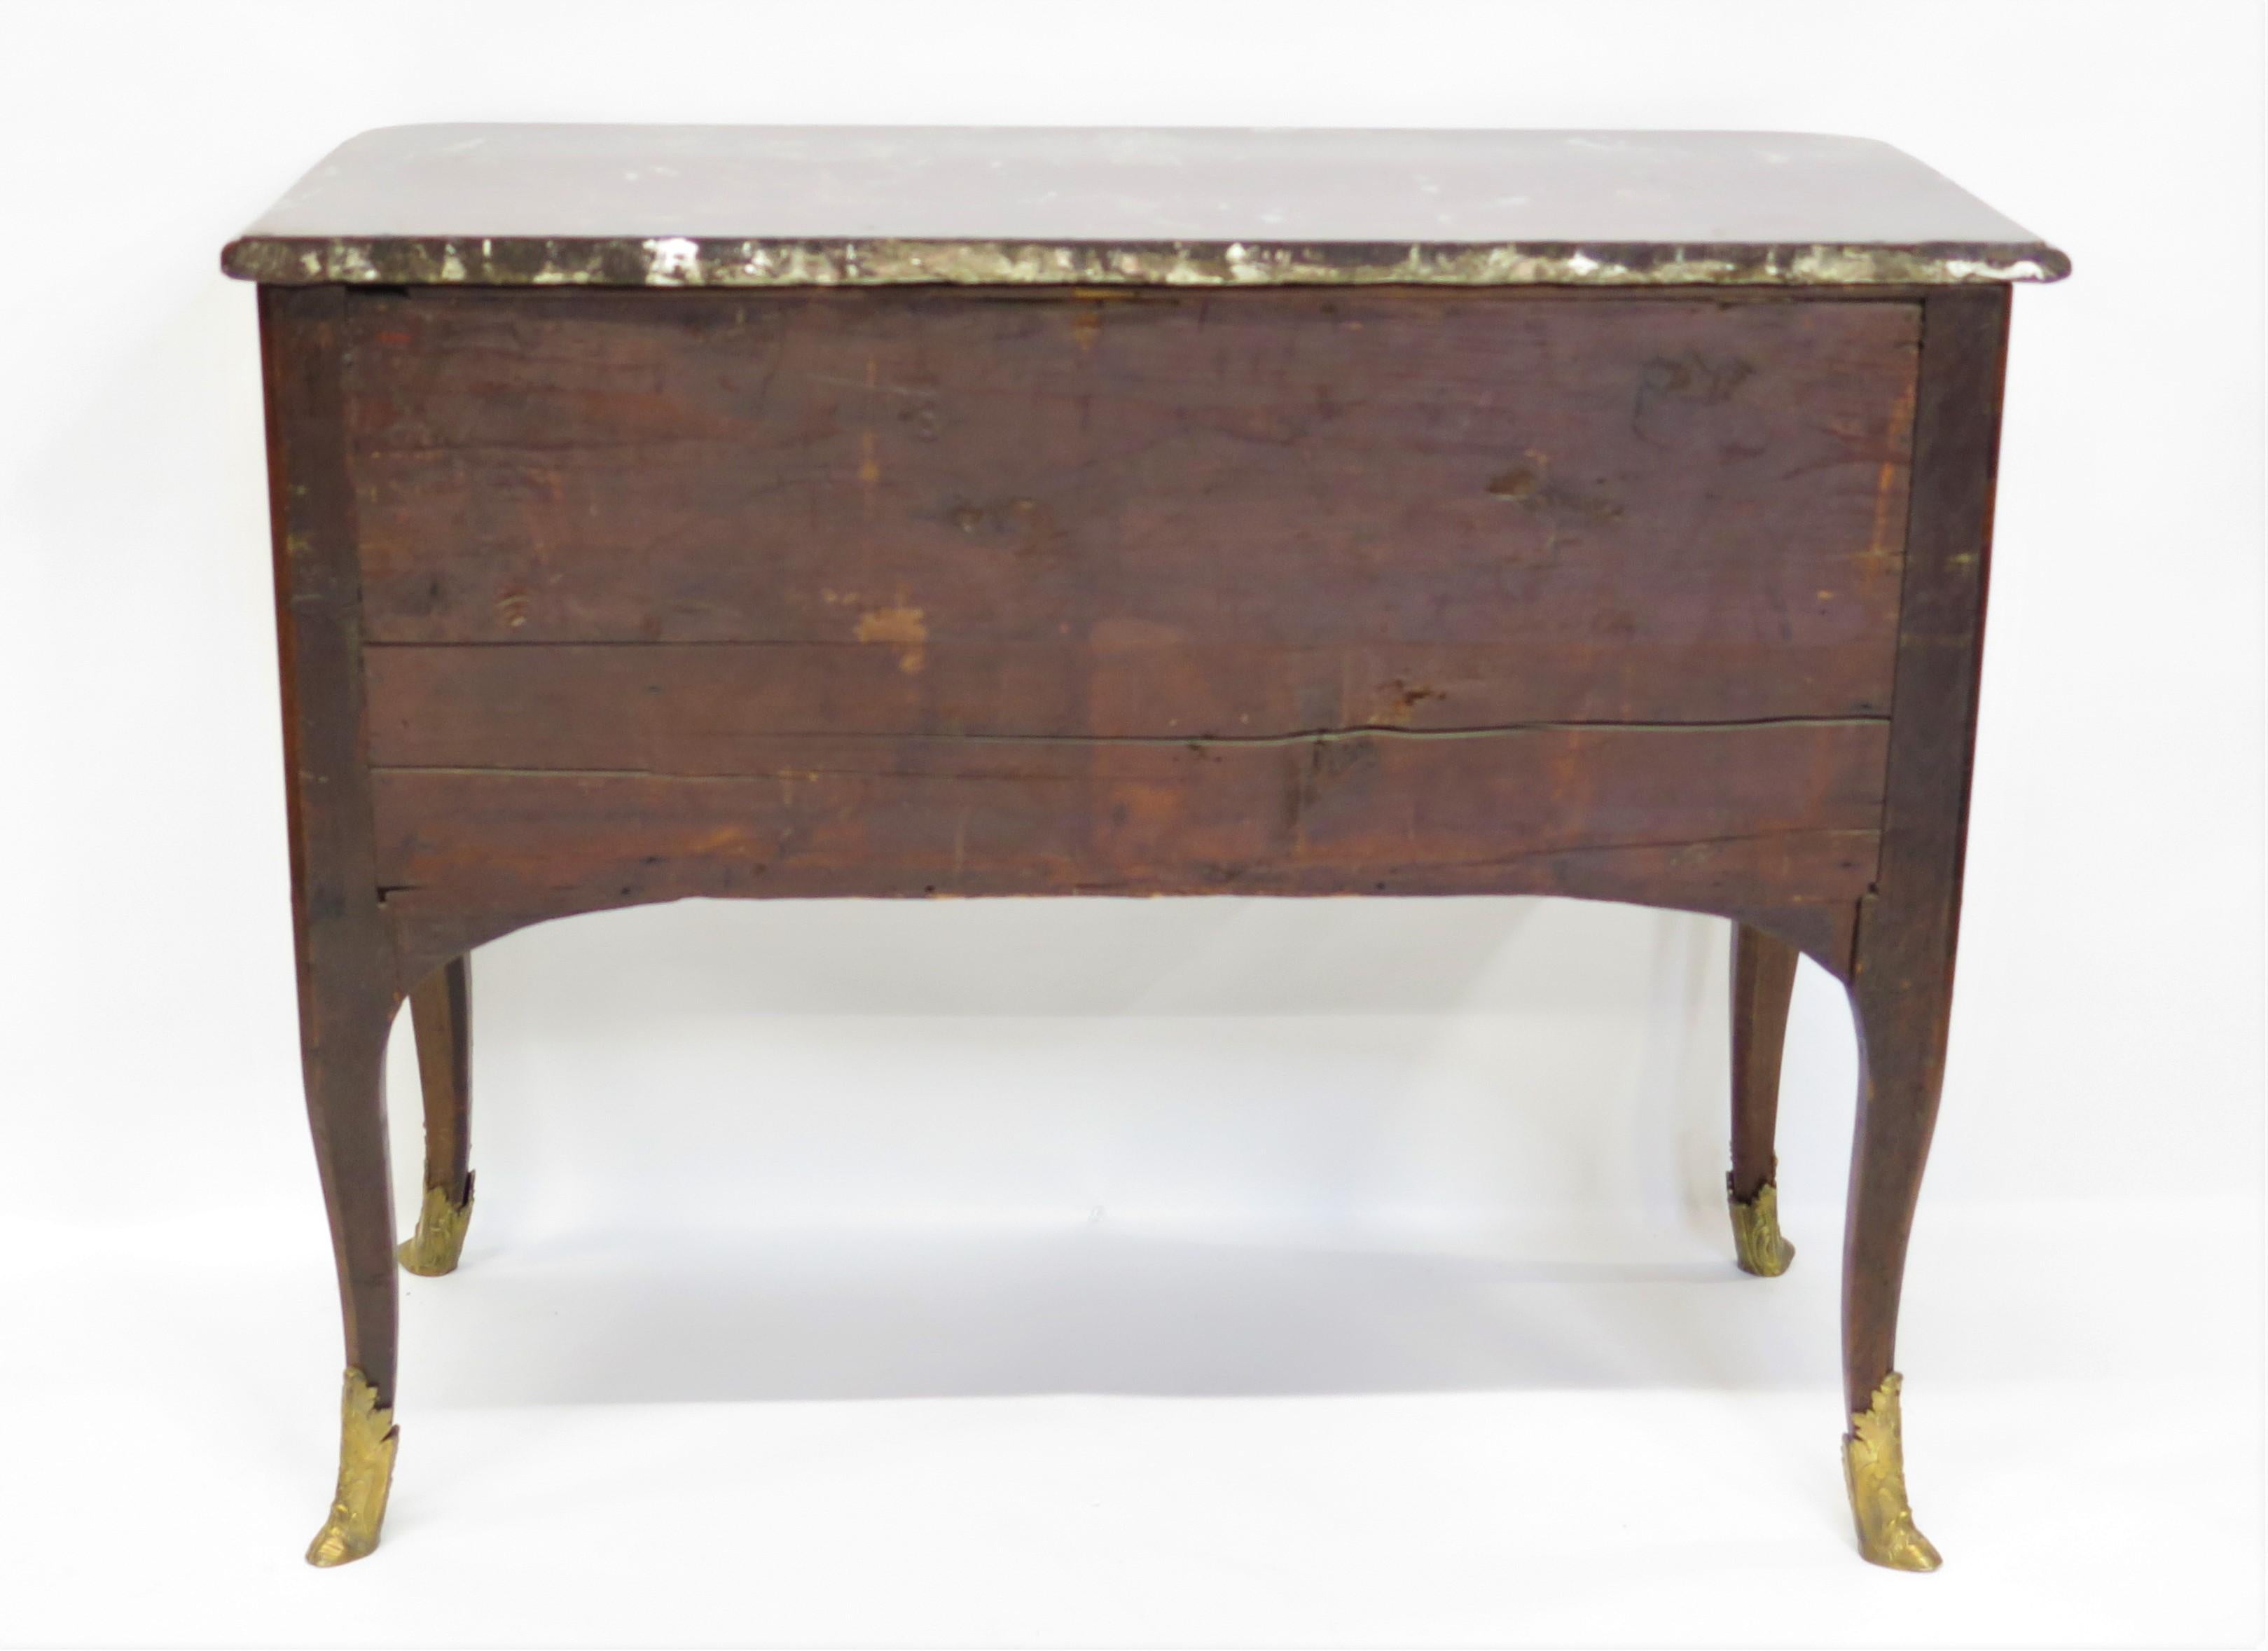 Hand-Crafted Louis XV Commode with Marquetry Decoration